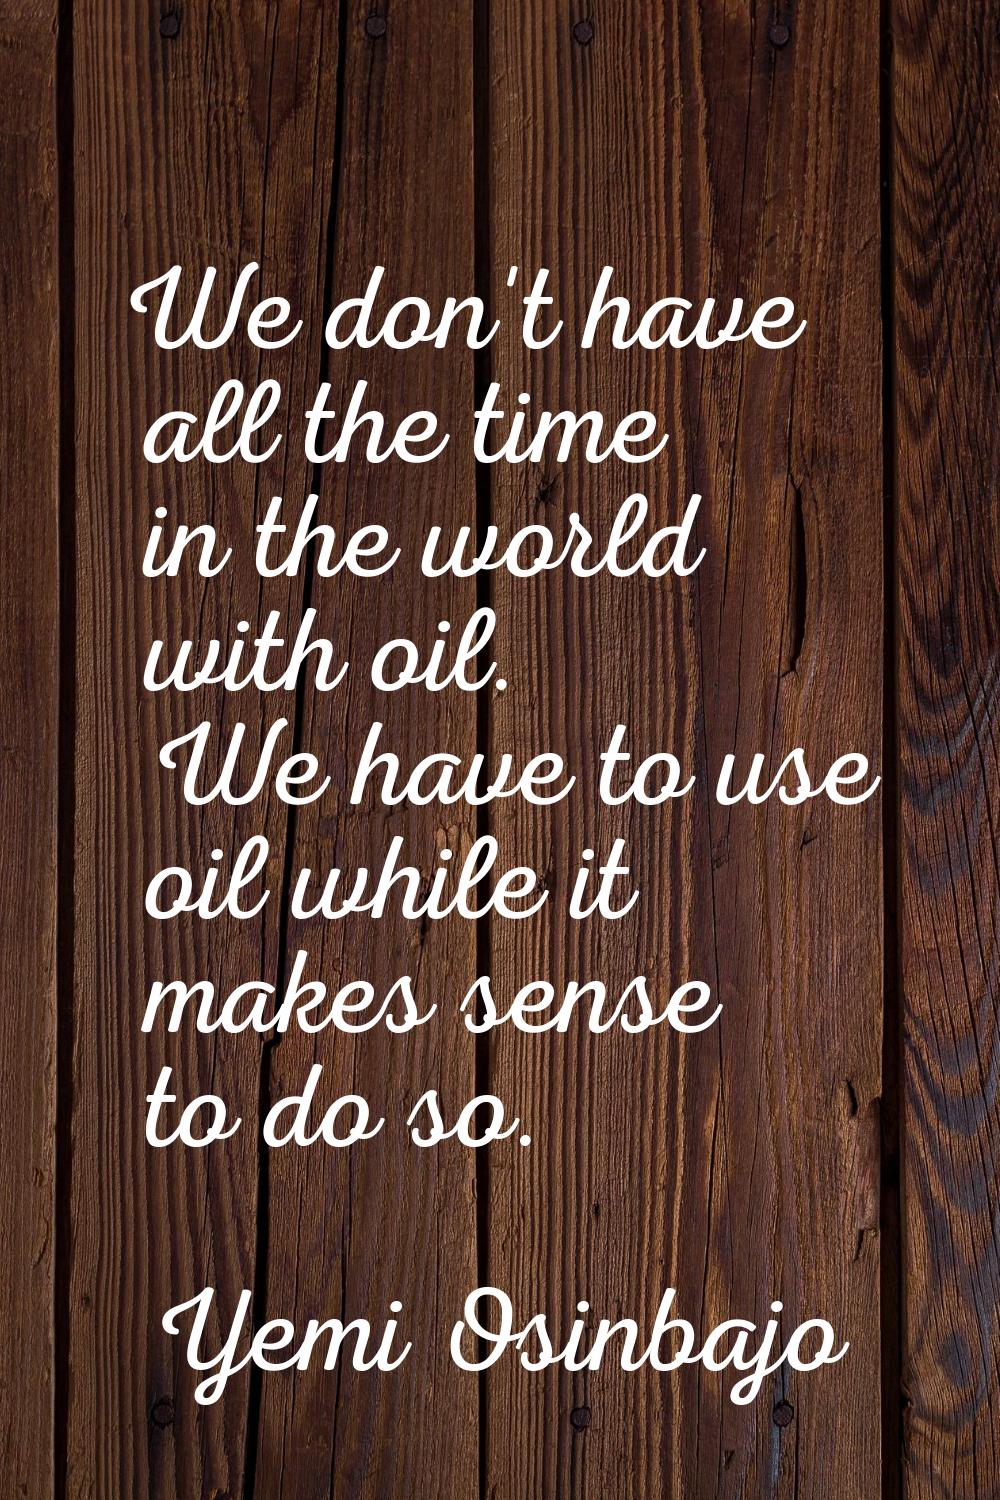 We don't have all the time in the world with oil. We have to use oil while it makes sense to do so.